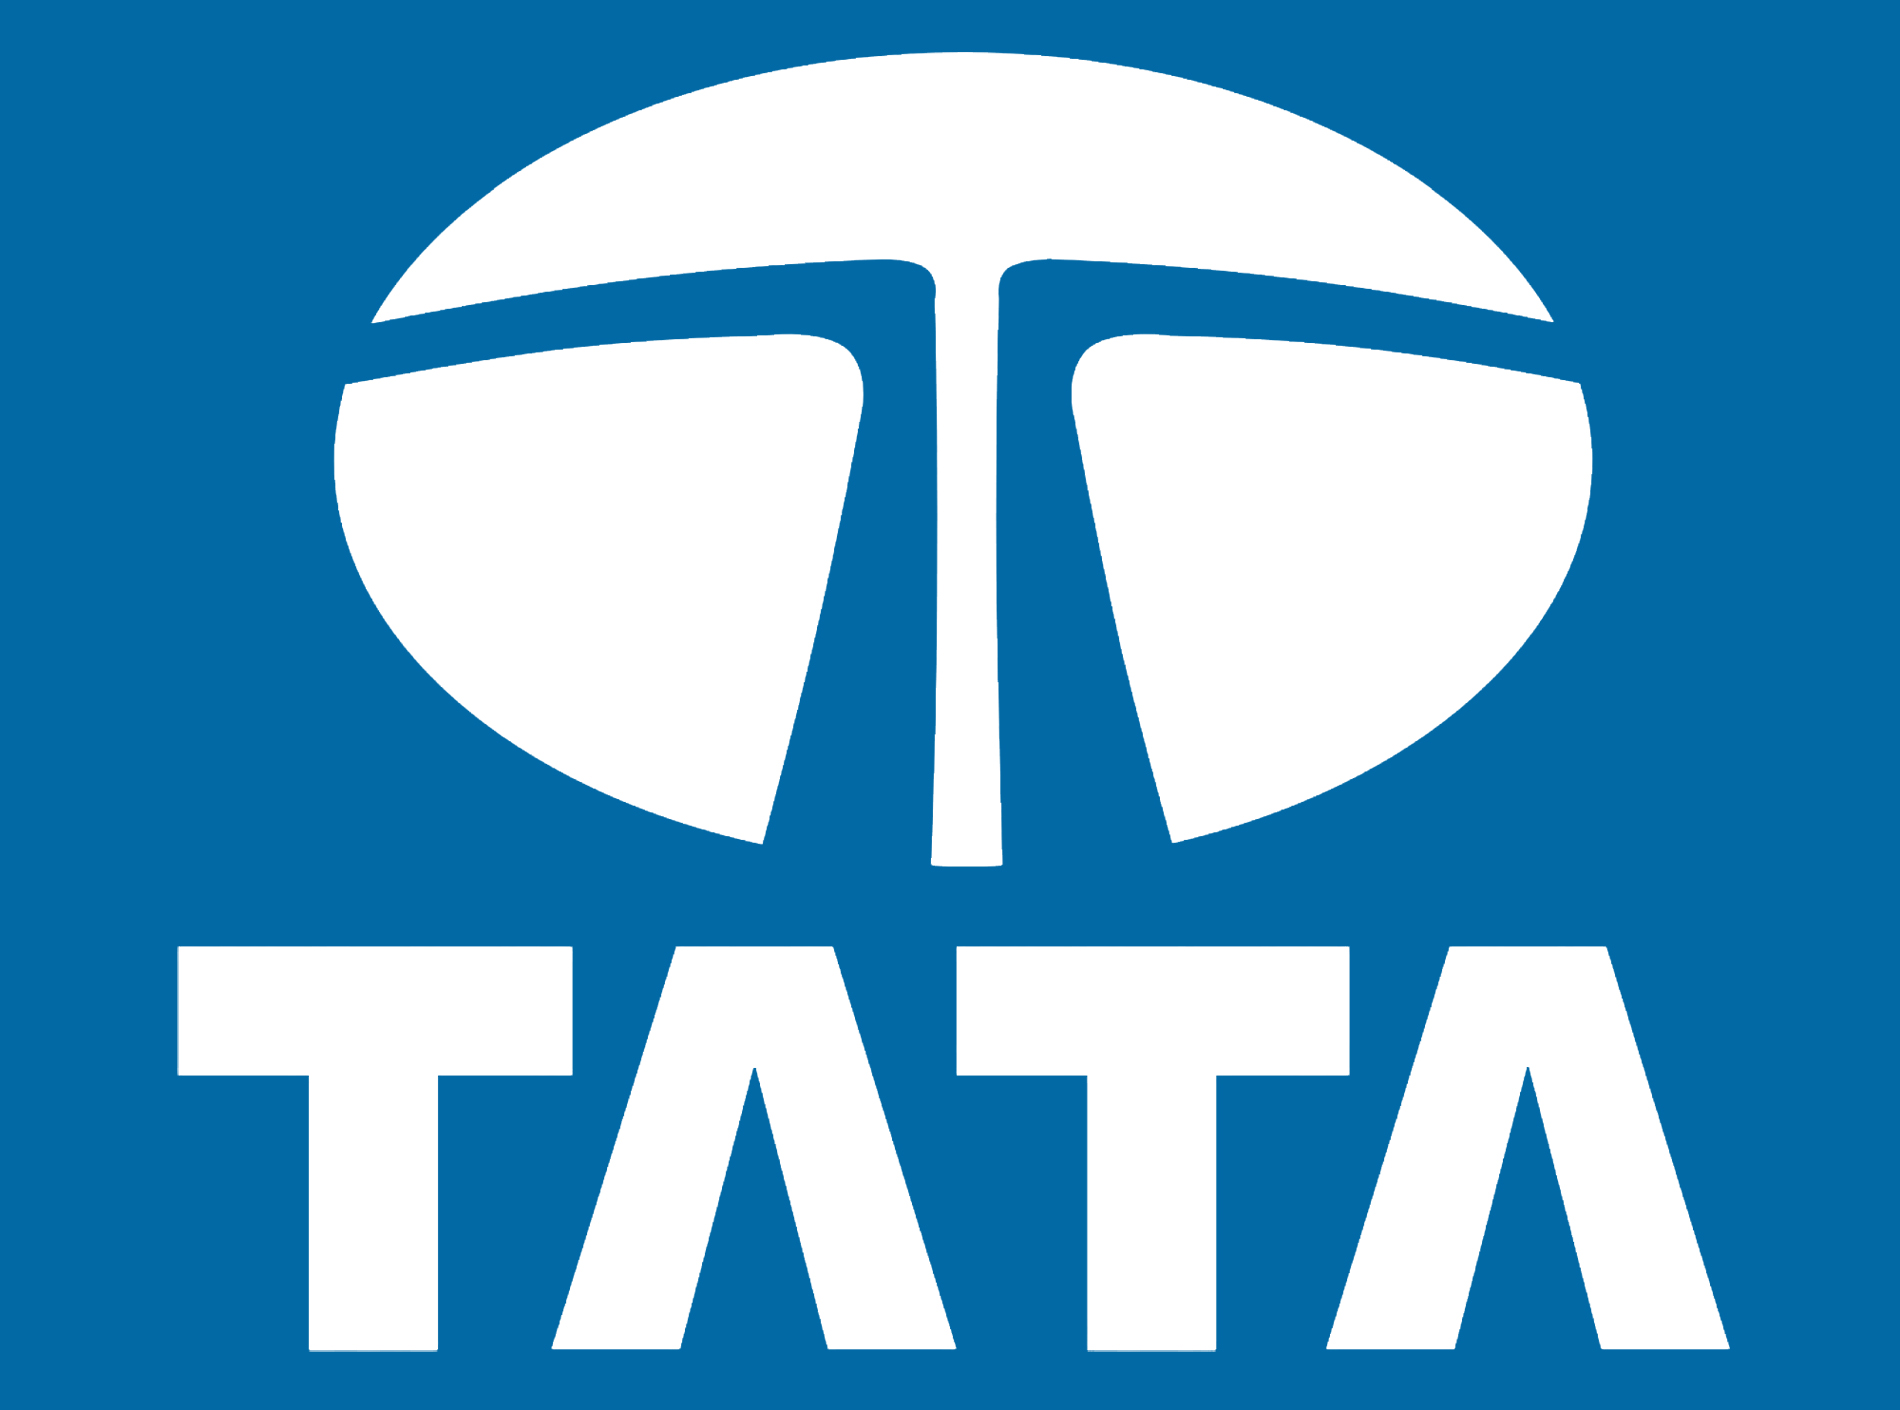 Tata Motors registered domestic sales of 1,07,786 units in Q1 FY22  Grows by 353% over Q1 FY21